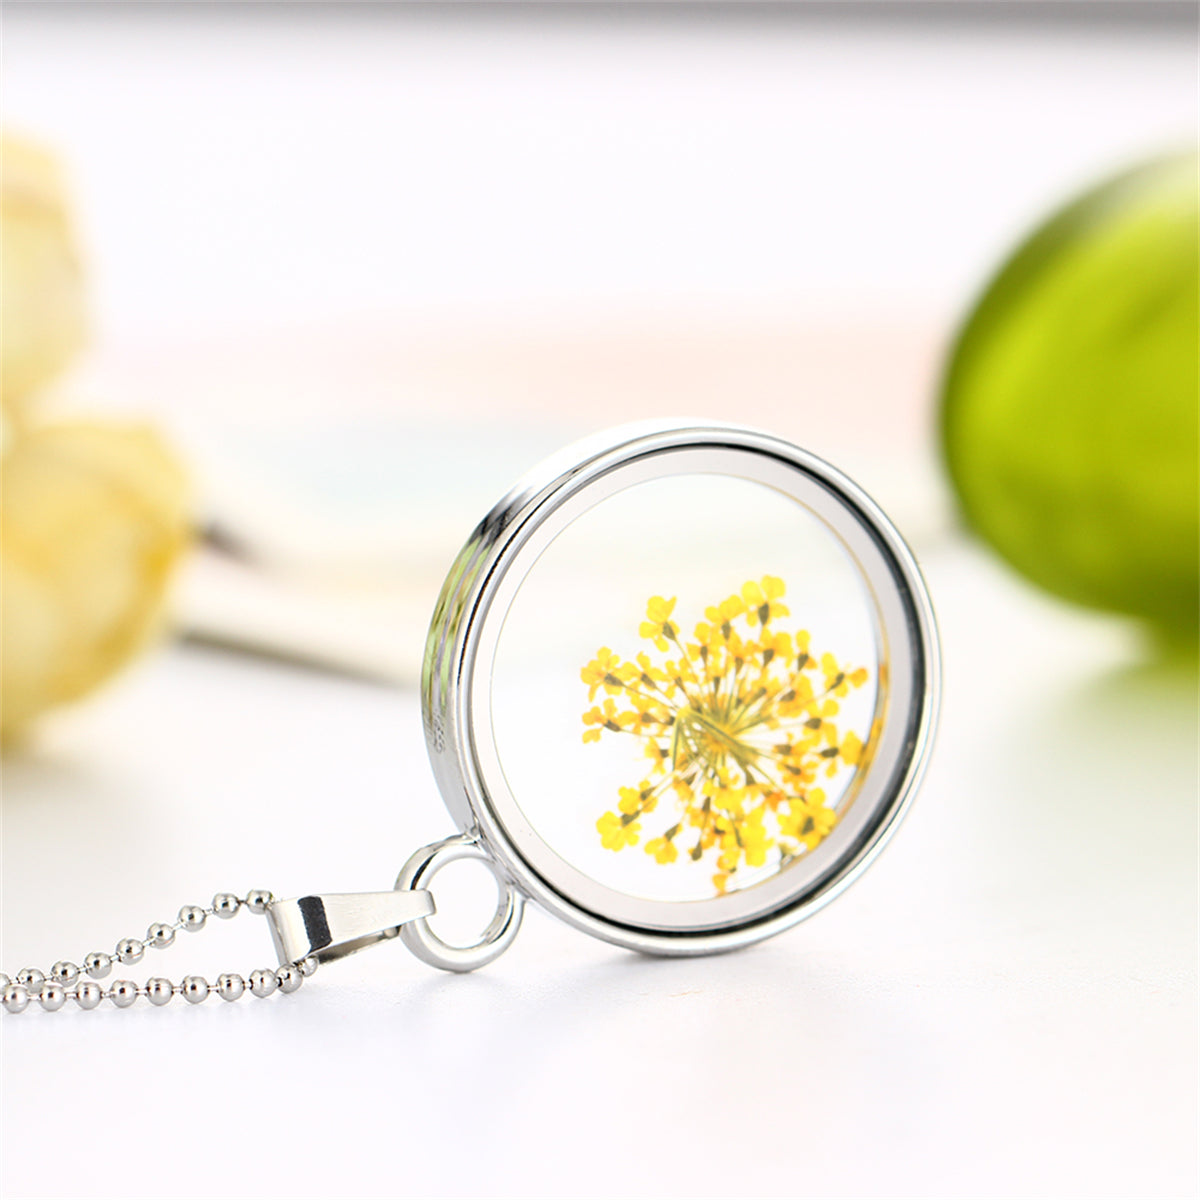 Yellow Gypsophila & Silver-Plated Resin Round Pendant Necklace